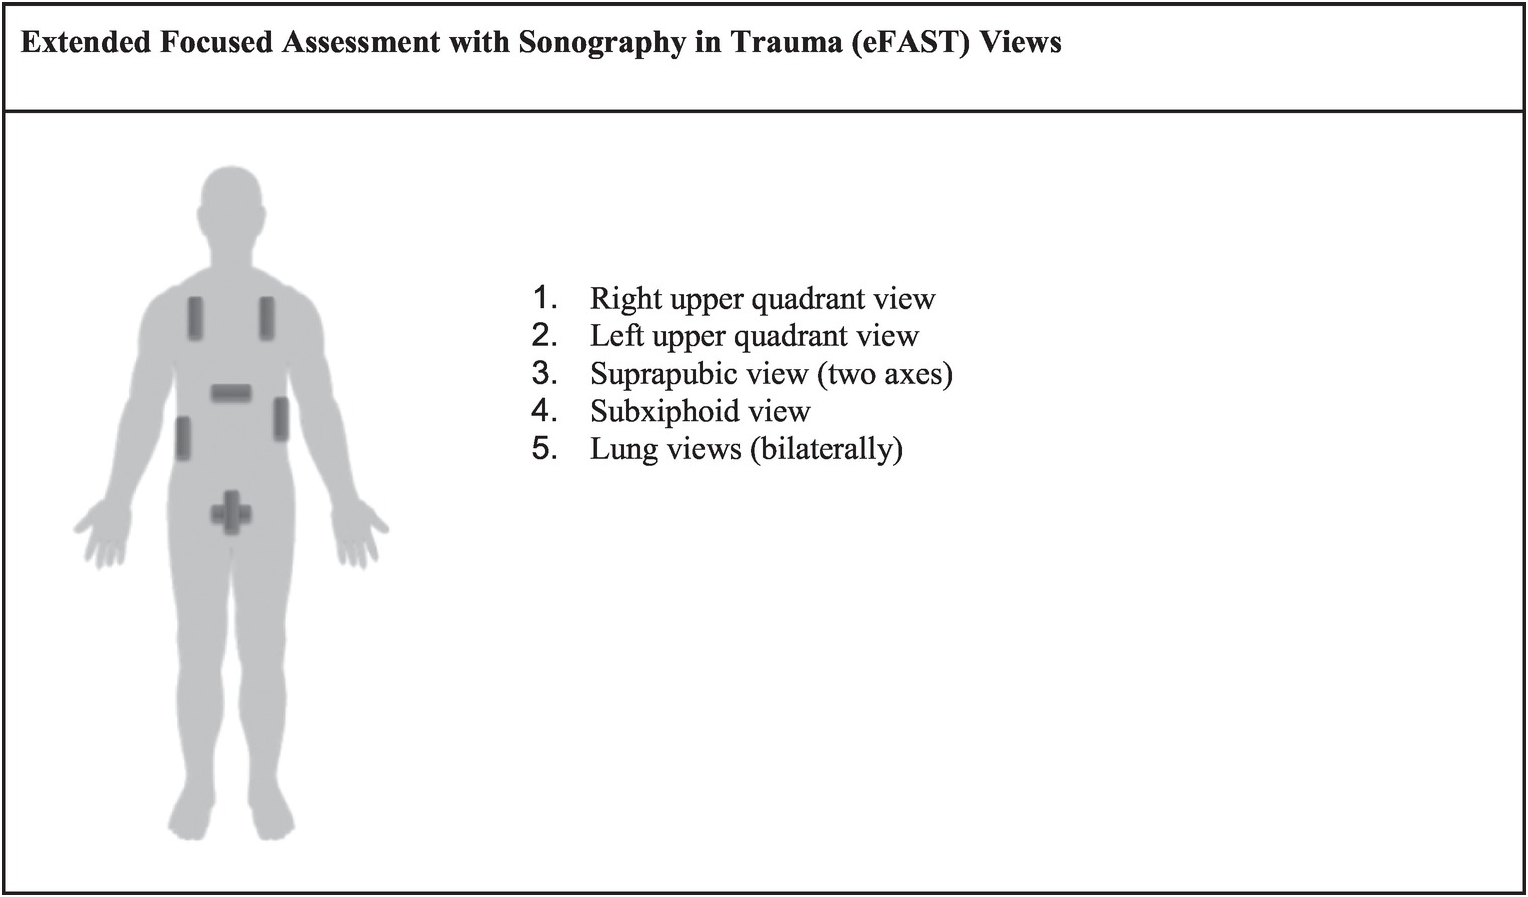 Extended focussed assessment by sonography in trauma (eFAST) scan